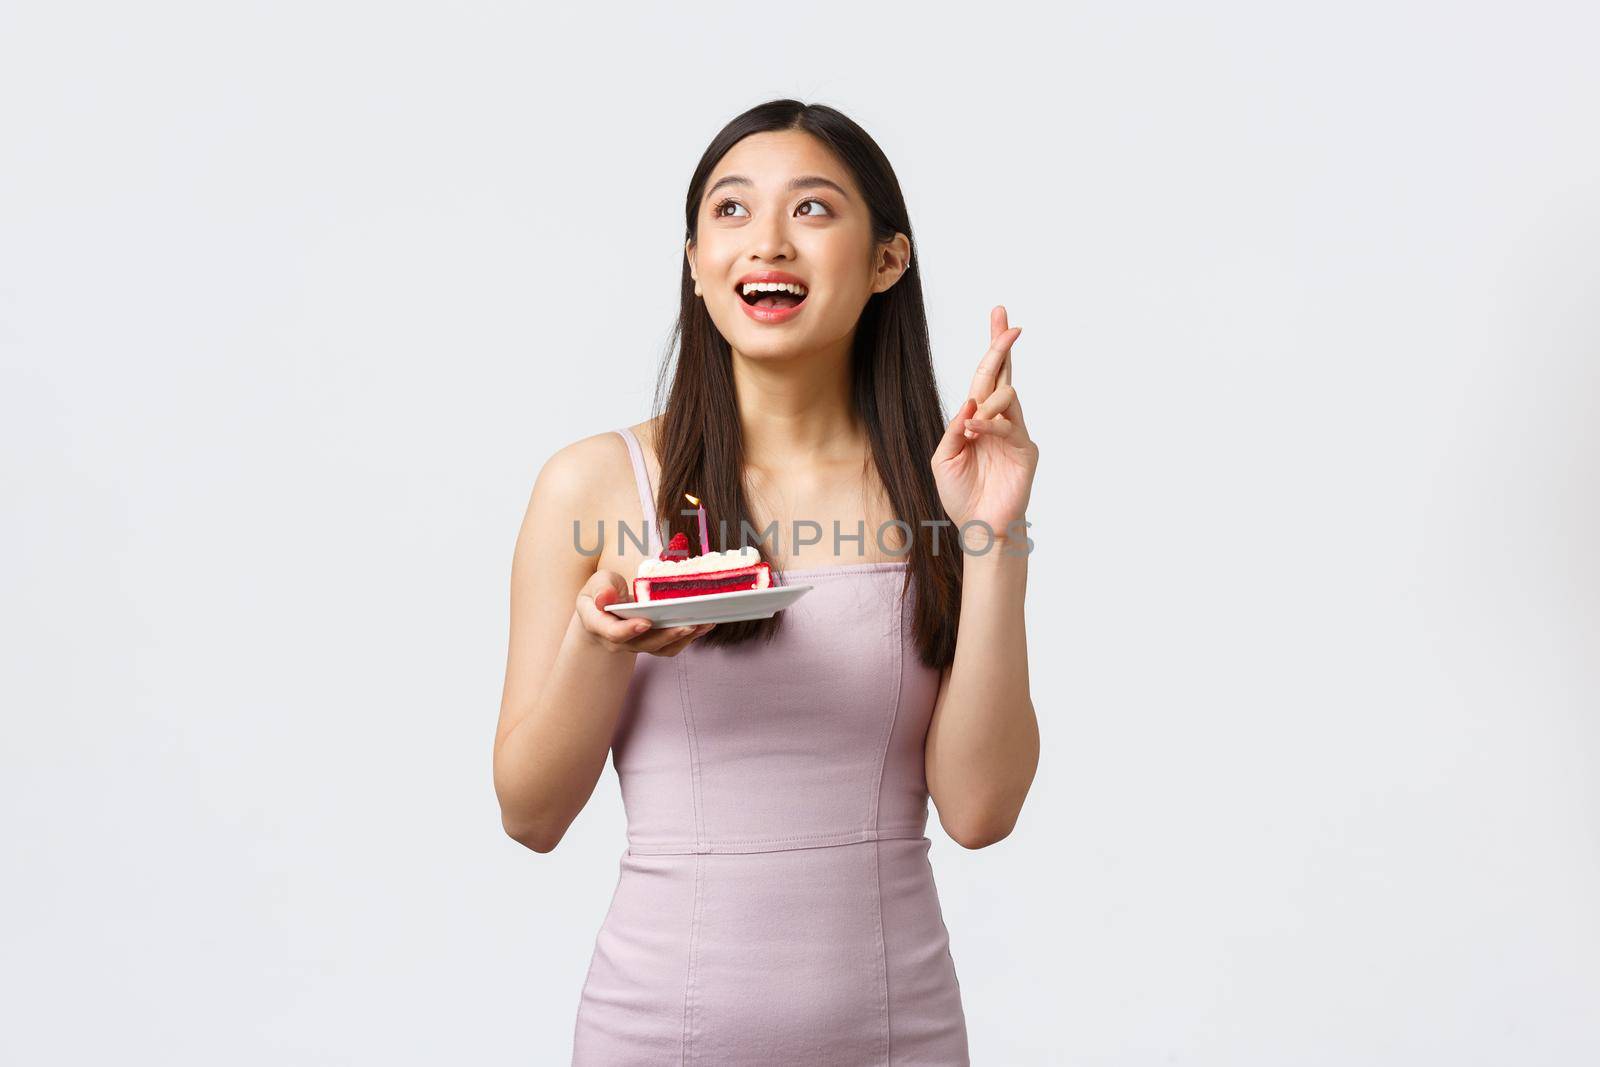 Celebration, party and holidays concept. Hopeful dreamy upbeat birthday girl in dress, cross fingers good luck looking upper left corner, holding b-day cake, white background by Benzoix